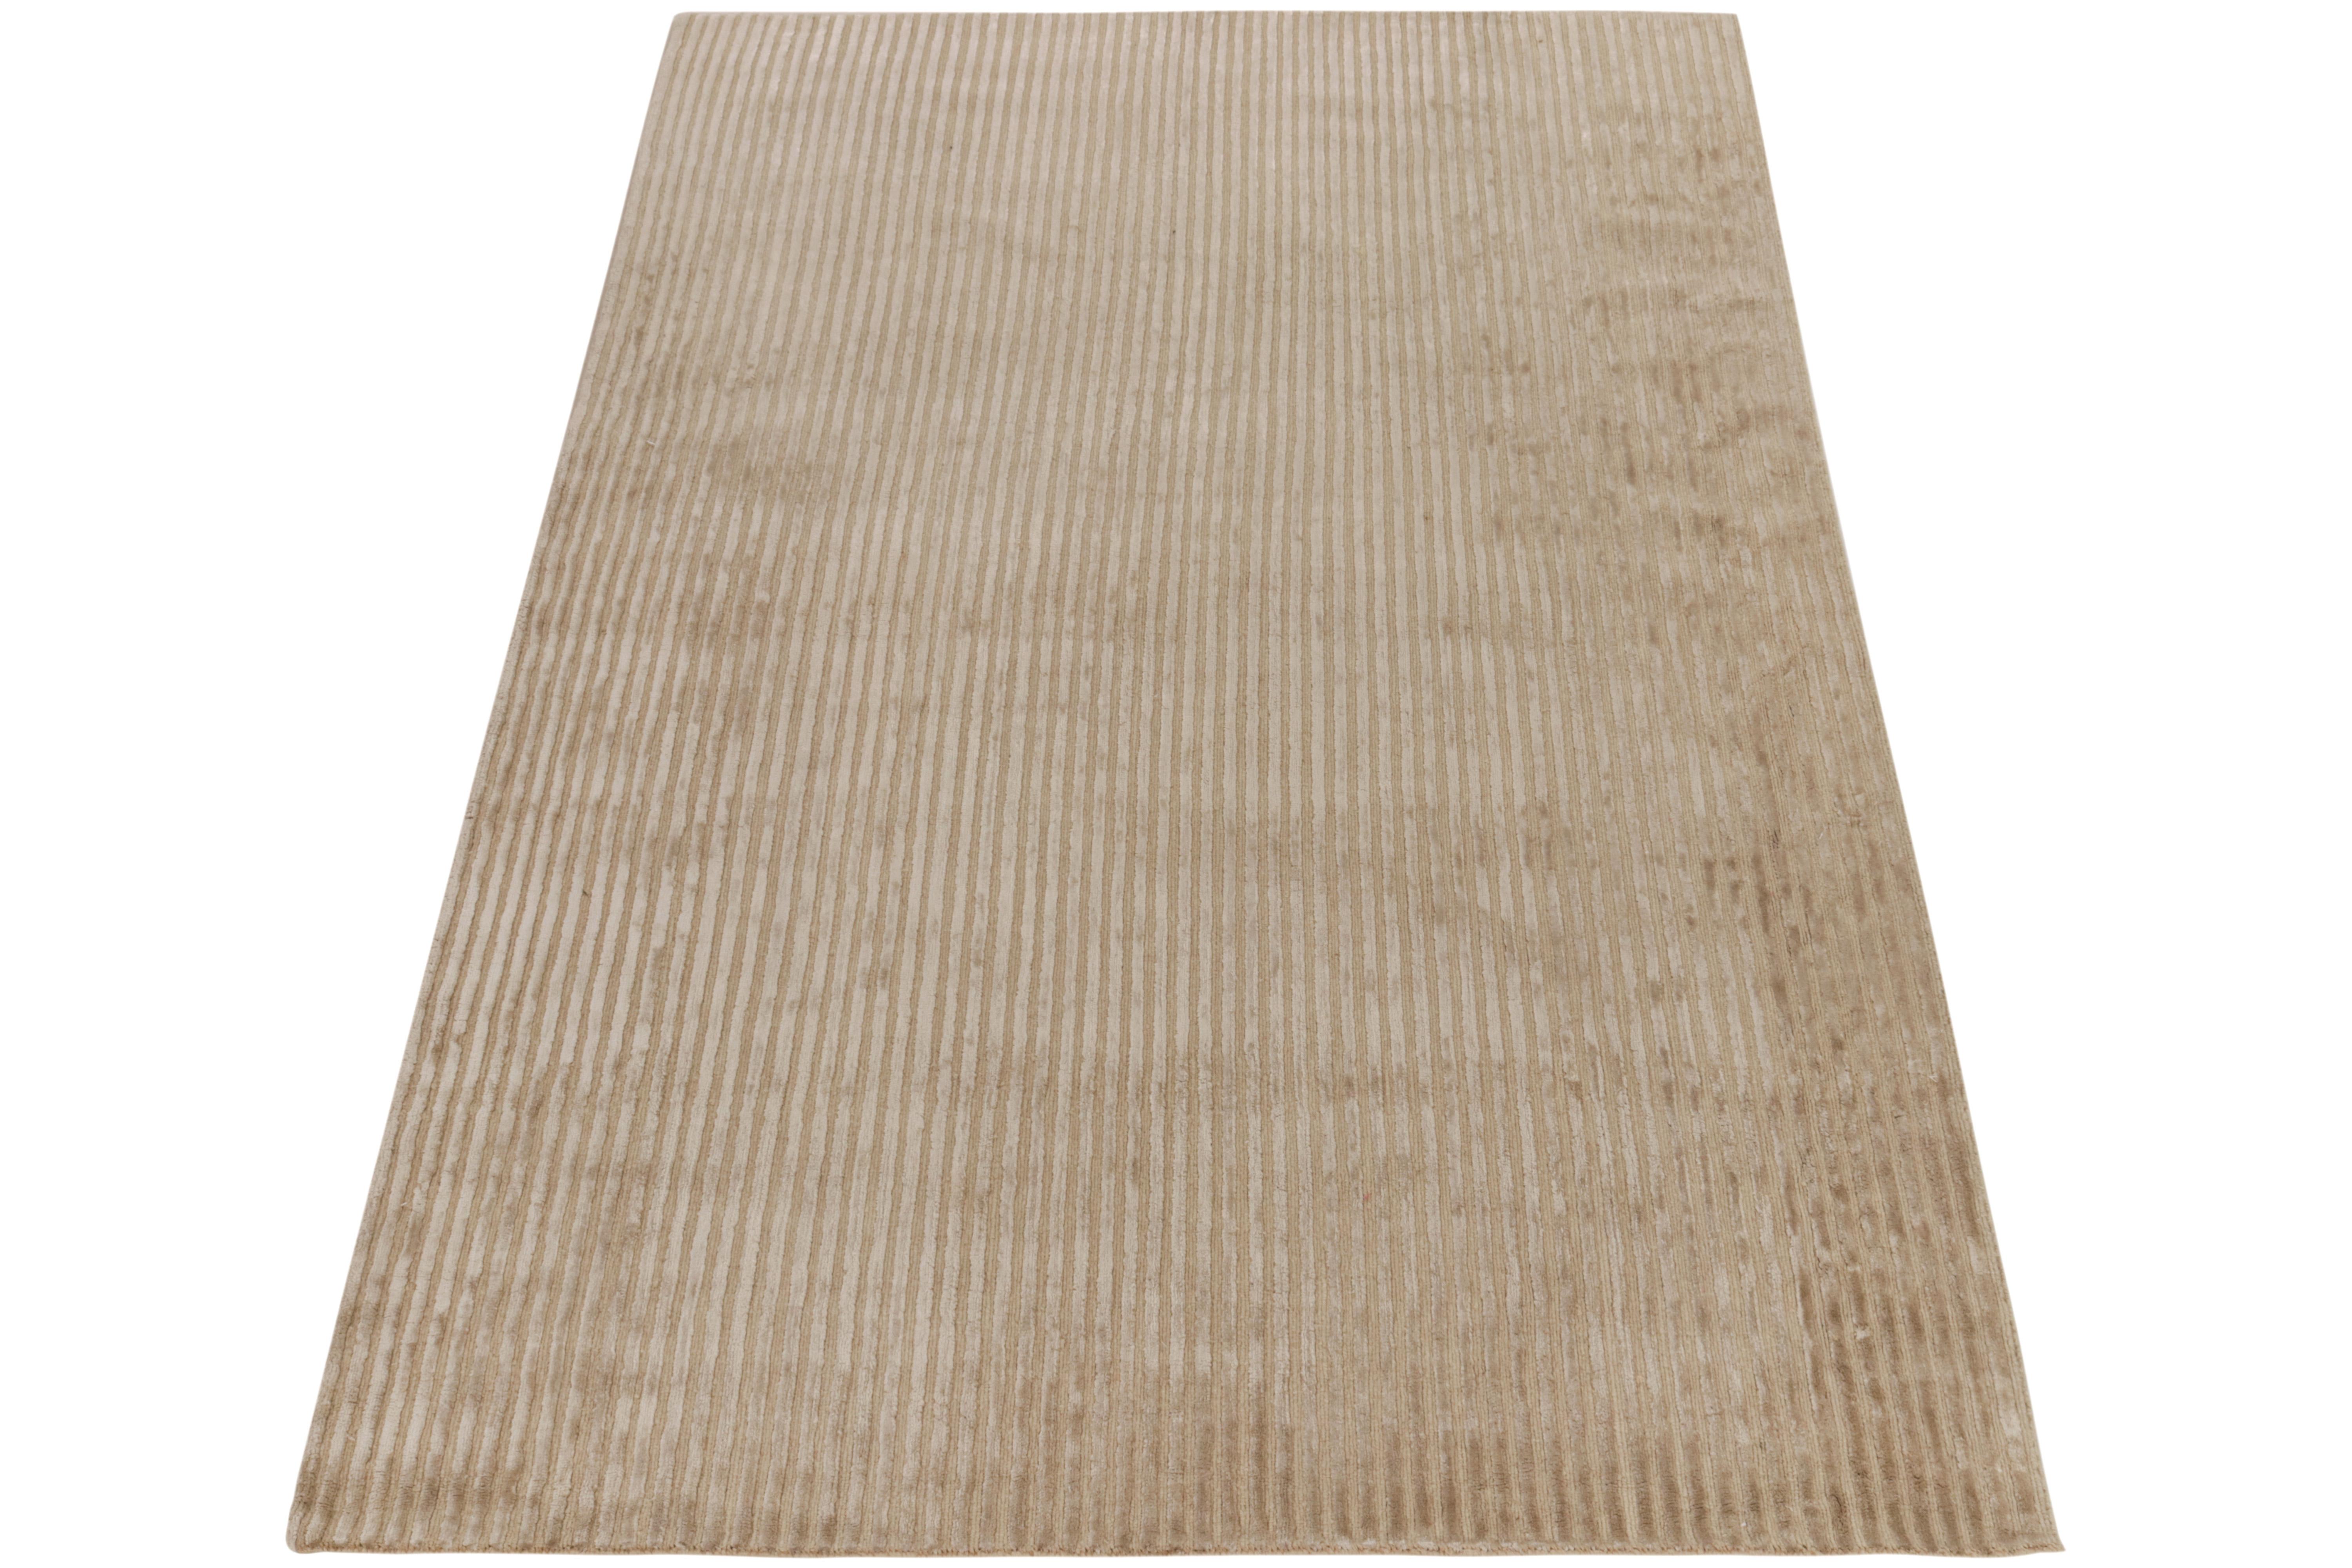 Hand-knotted in fine wool & silk, a contemporary piece from Rug & Kilim’s texture of color collection. The 4x7 rug observes a ribbed high low subtlety in delicious tones of beige complementing the natural sheen of silk. Simplistic yet luxurious, a